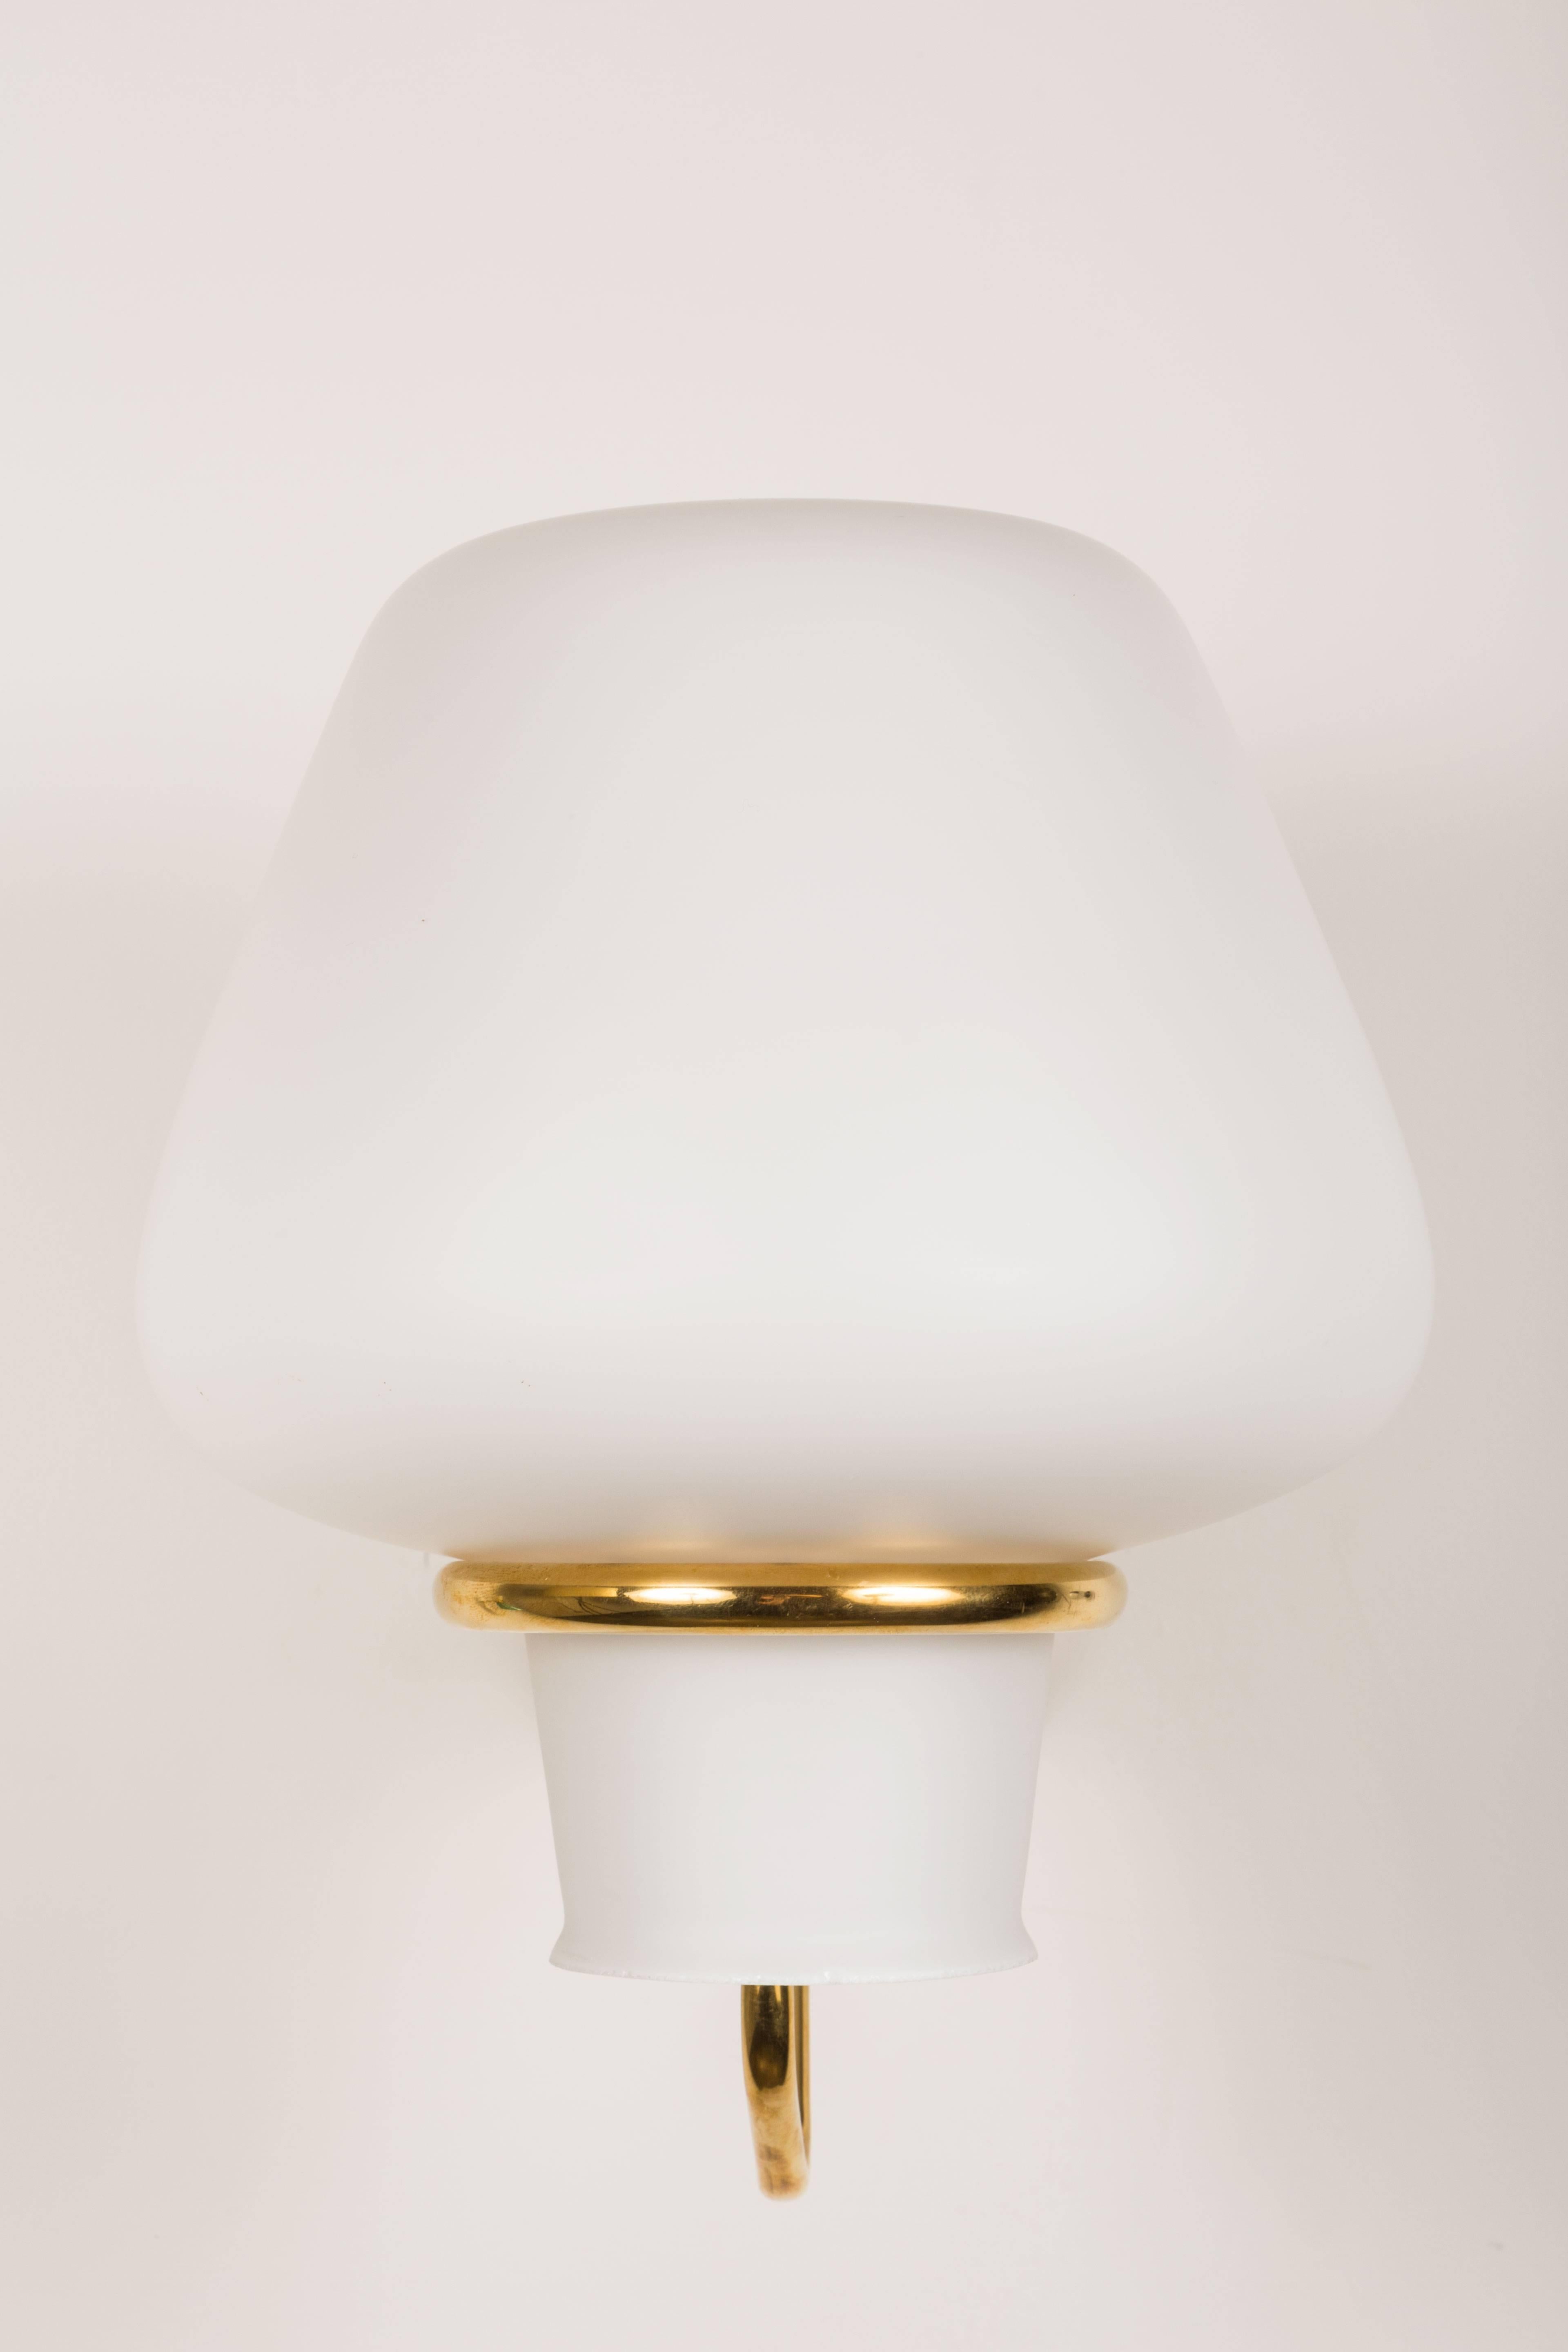 Swedish Pair of Brass and White Satin Glass Sconces by ASEA of Sweden